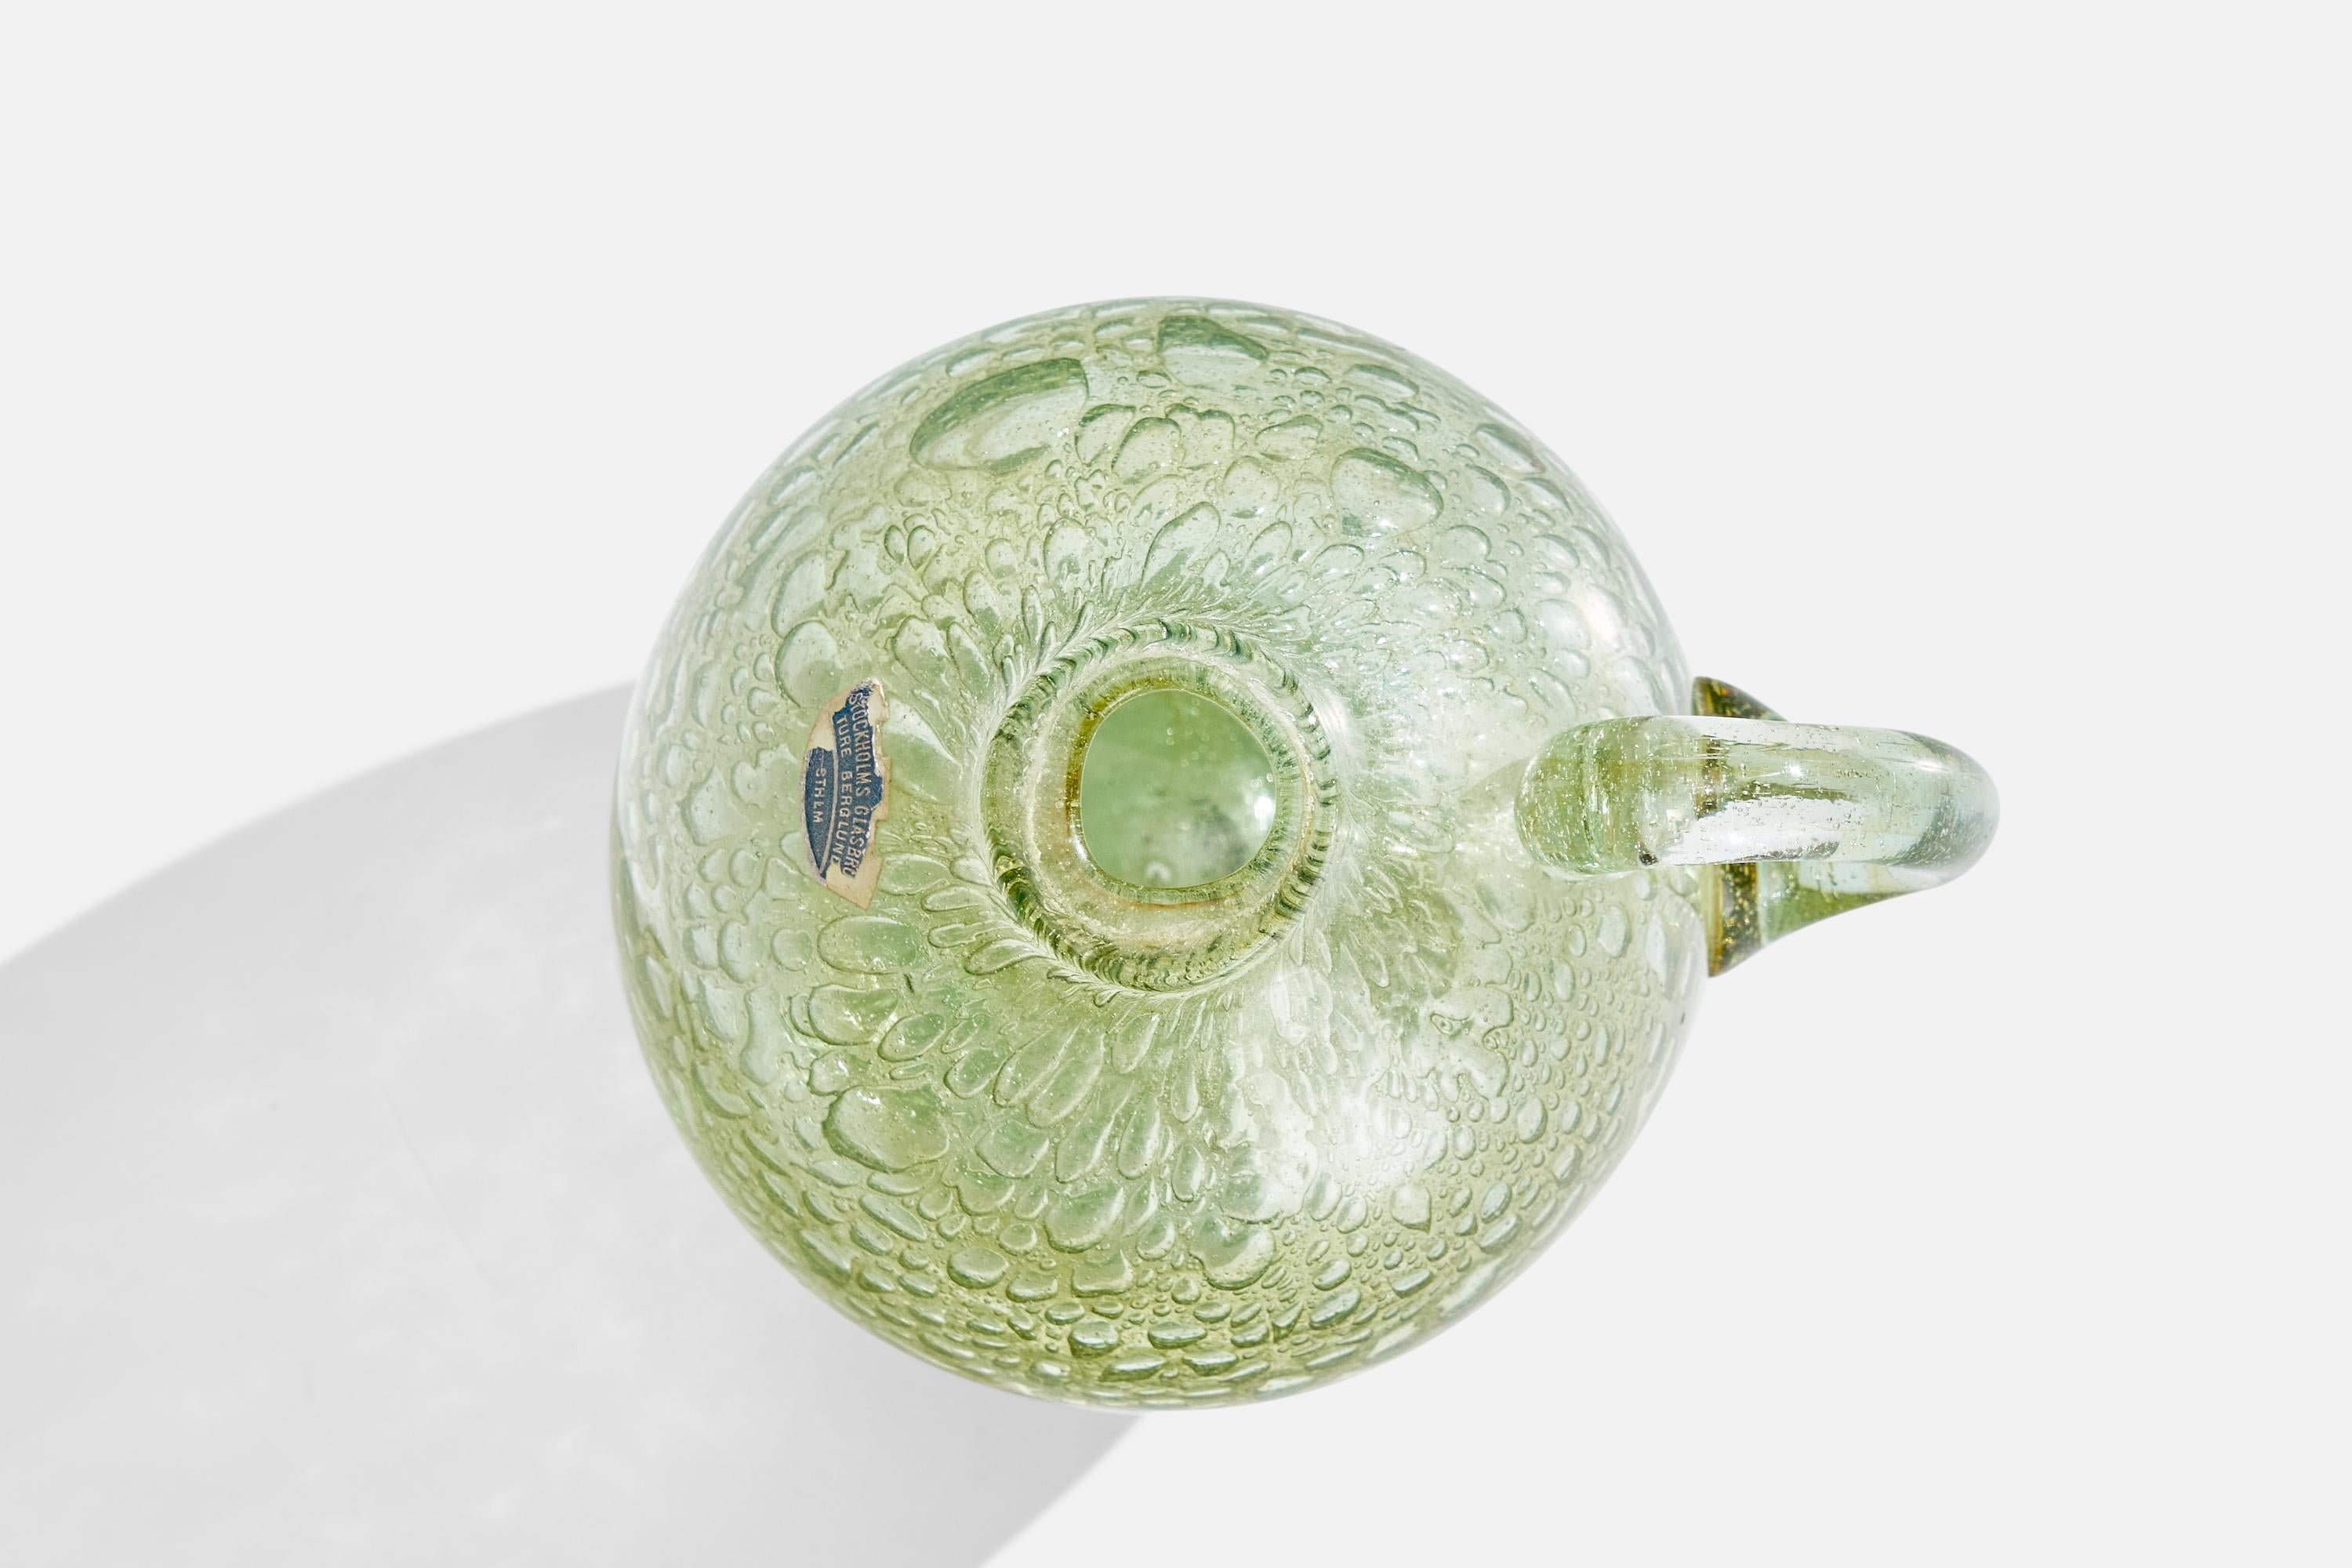 Mid-20th Century Ture Berglund, Vase, Glass, Sweden, 1940s For Sale